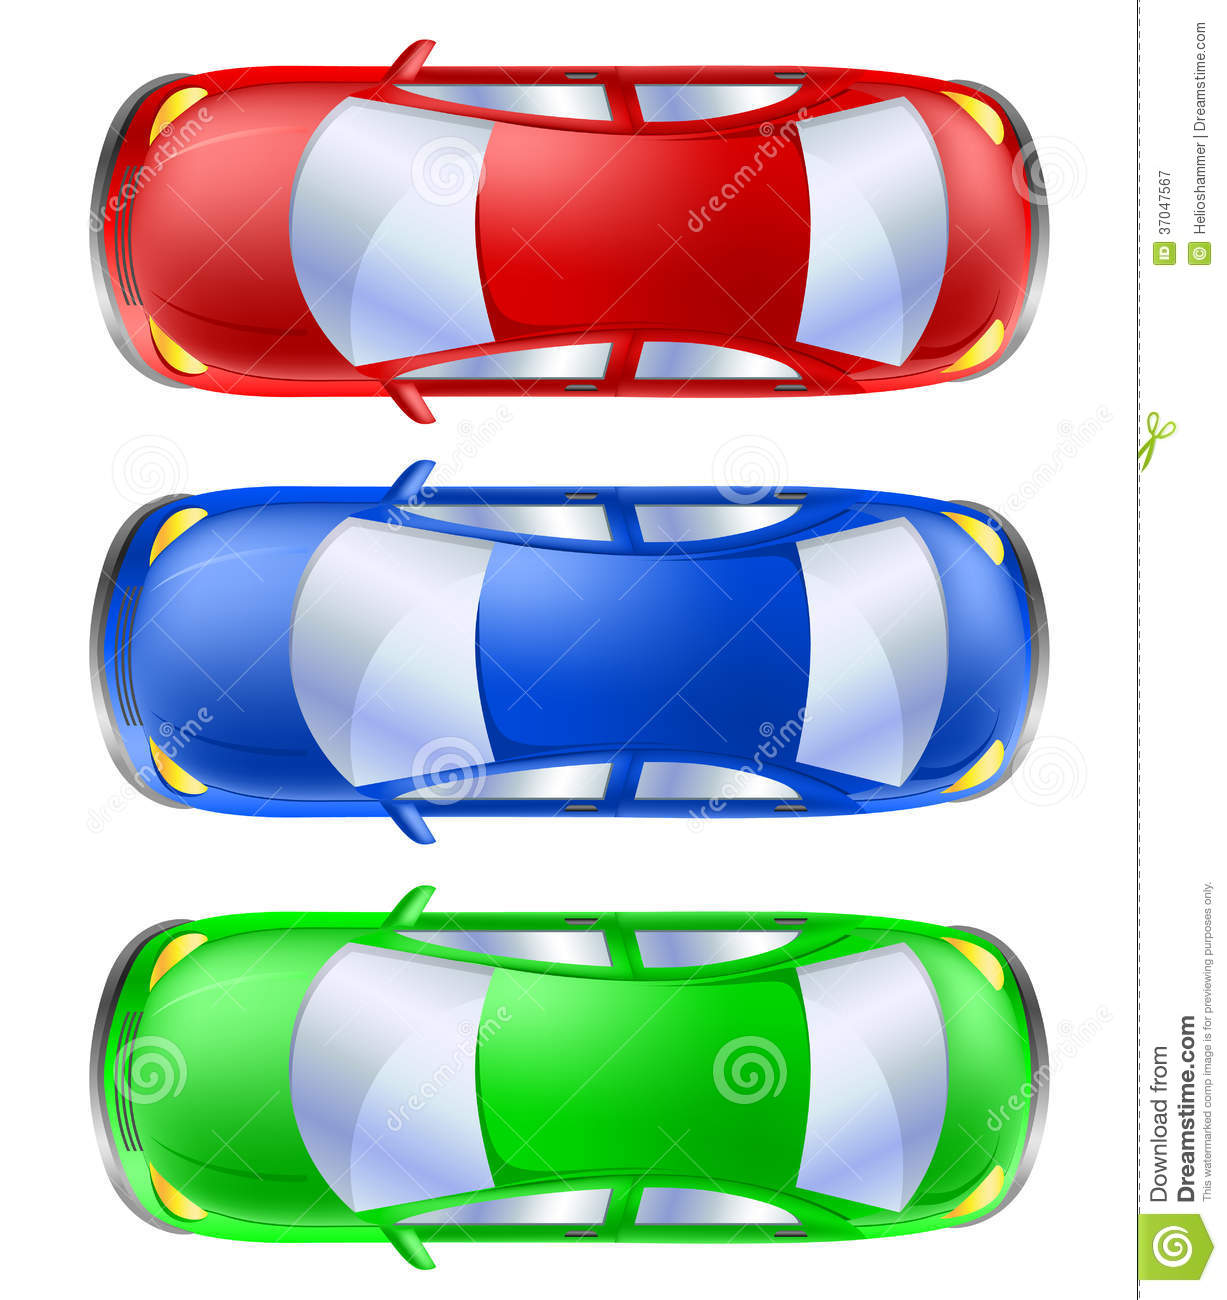 Top view of a car clipart.